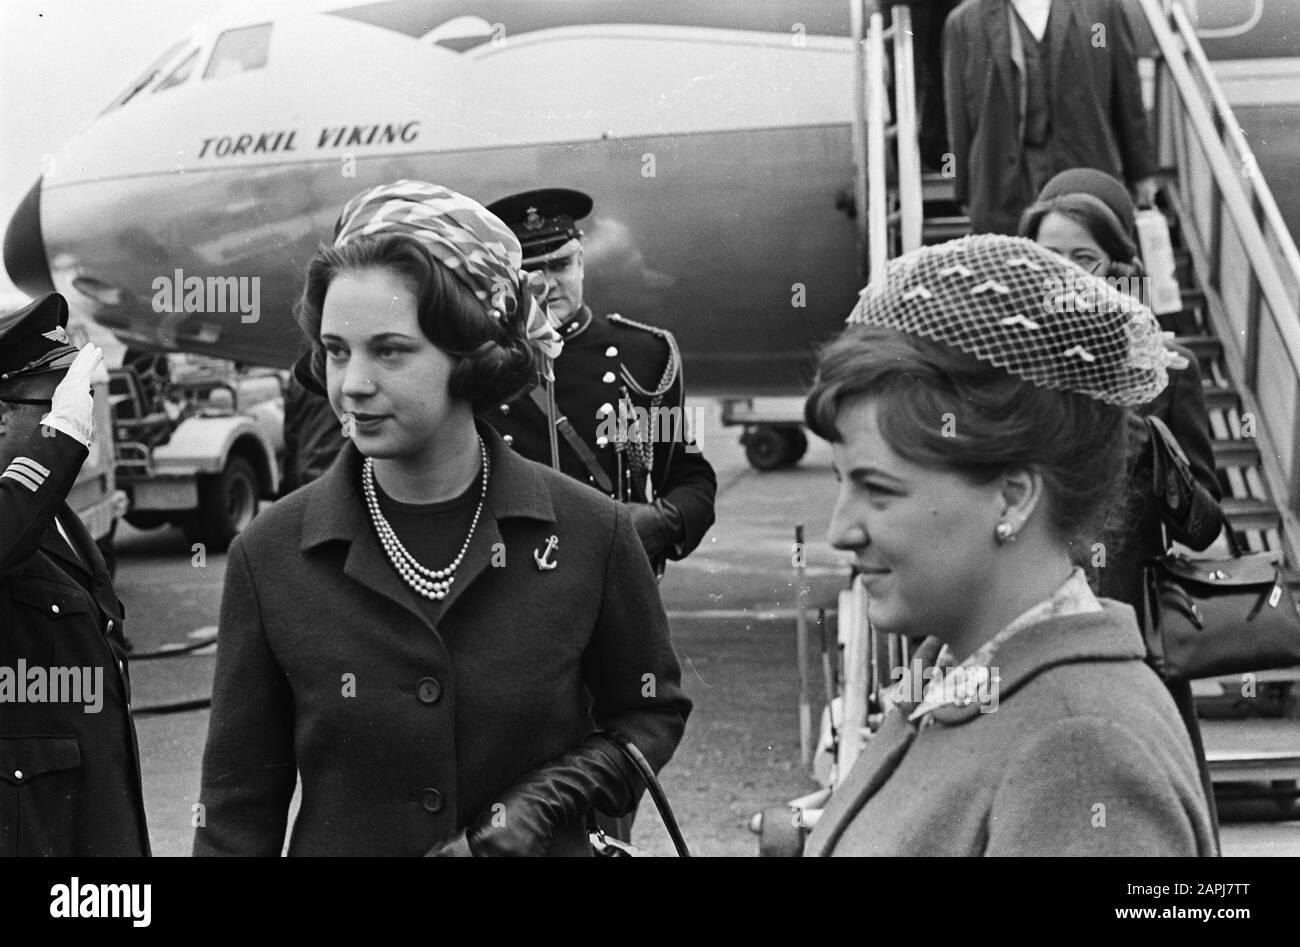 Danish Princess Benedikte in the Netherlands, Princess Benedikte and Princess Margriet Date: April 6, 1965 Location: Noord-Holland, Schiphol Personal name: Benedikte, Princess of Denmark, Margriet, princess Stock Photo